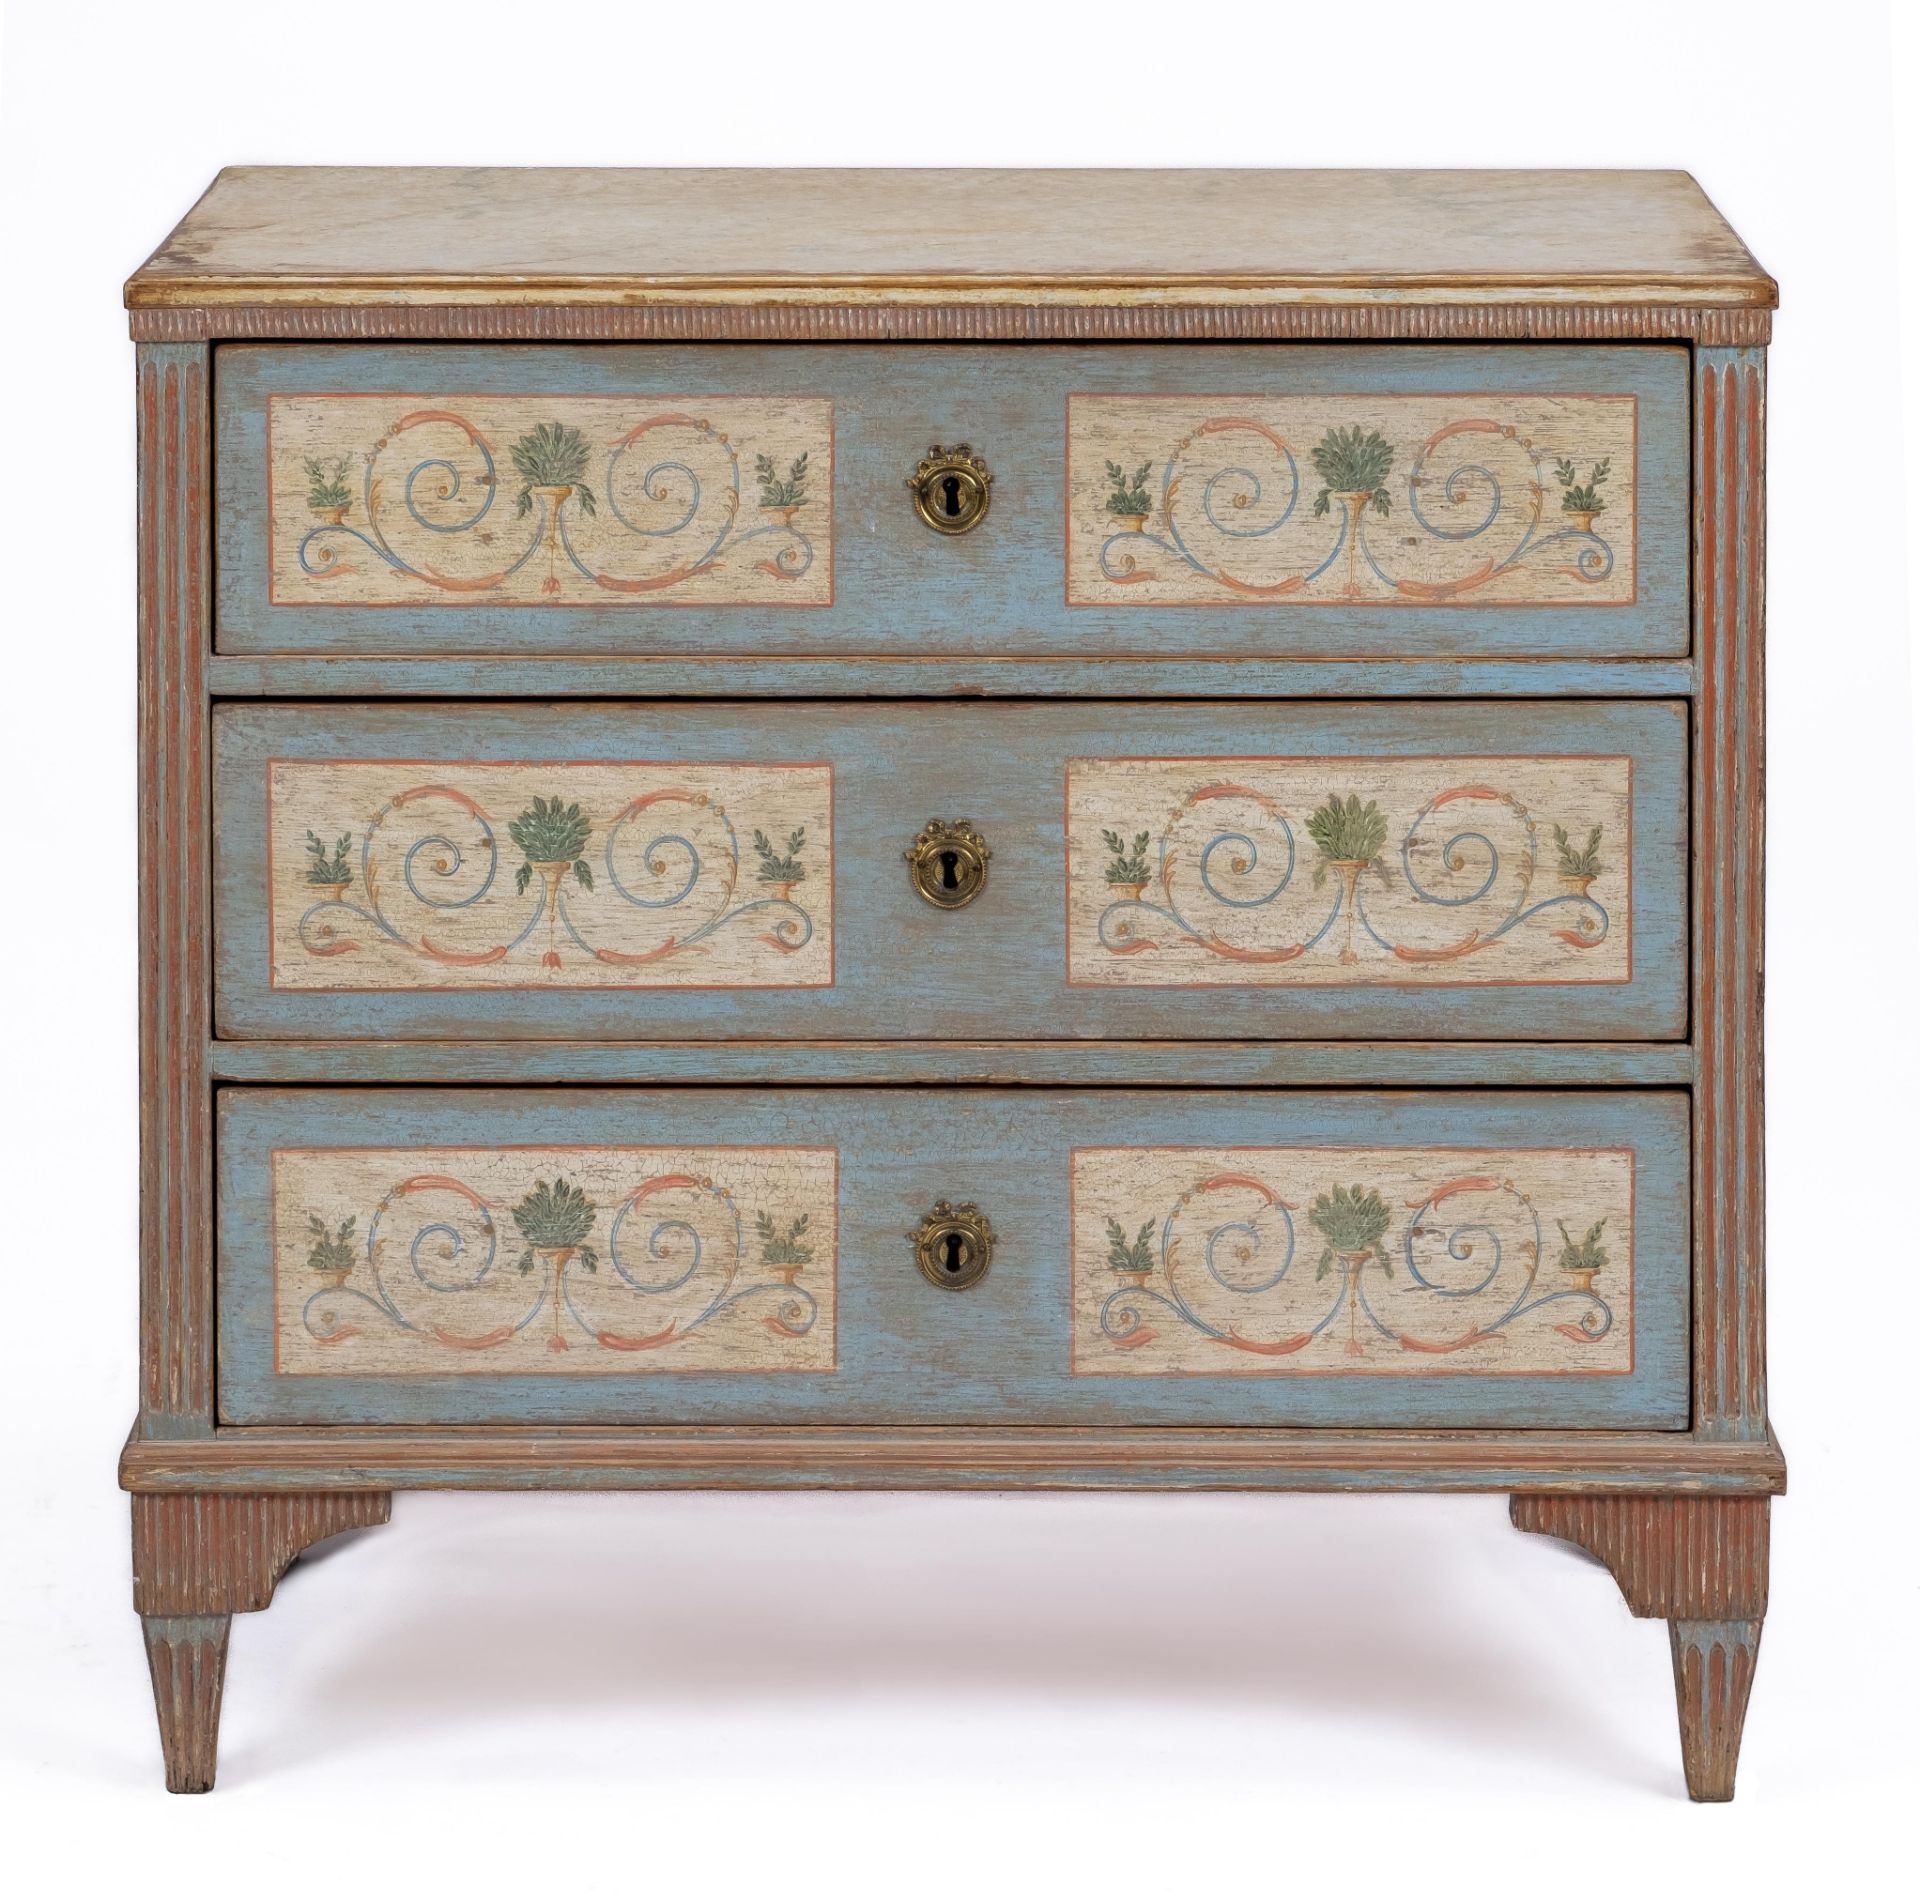 A Swedish polychrome-painted pine commode